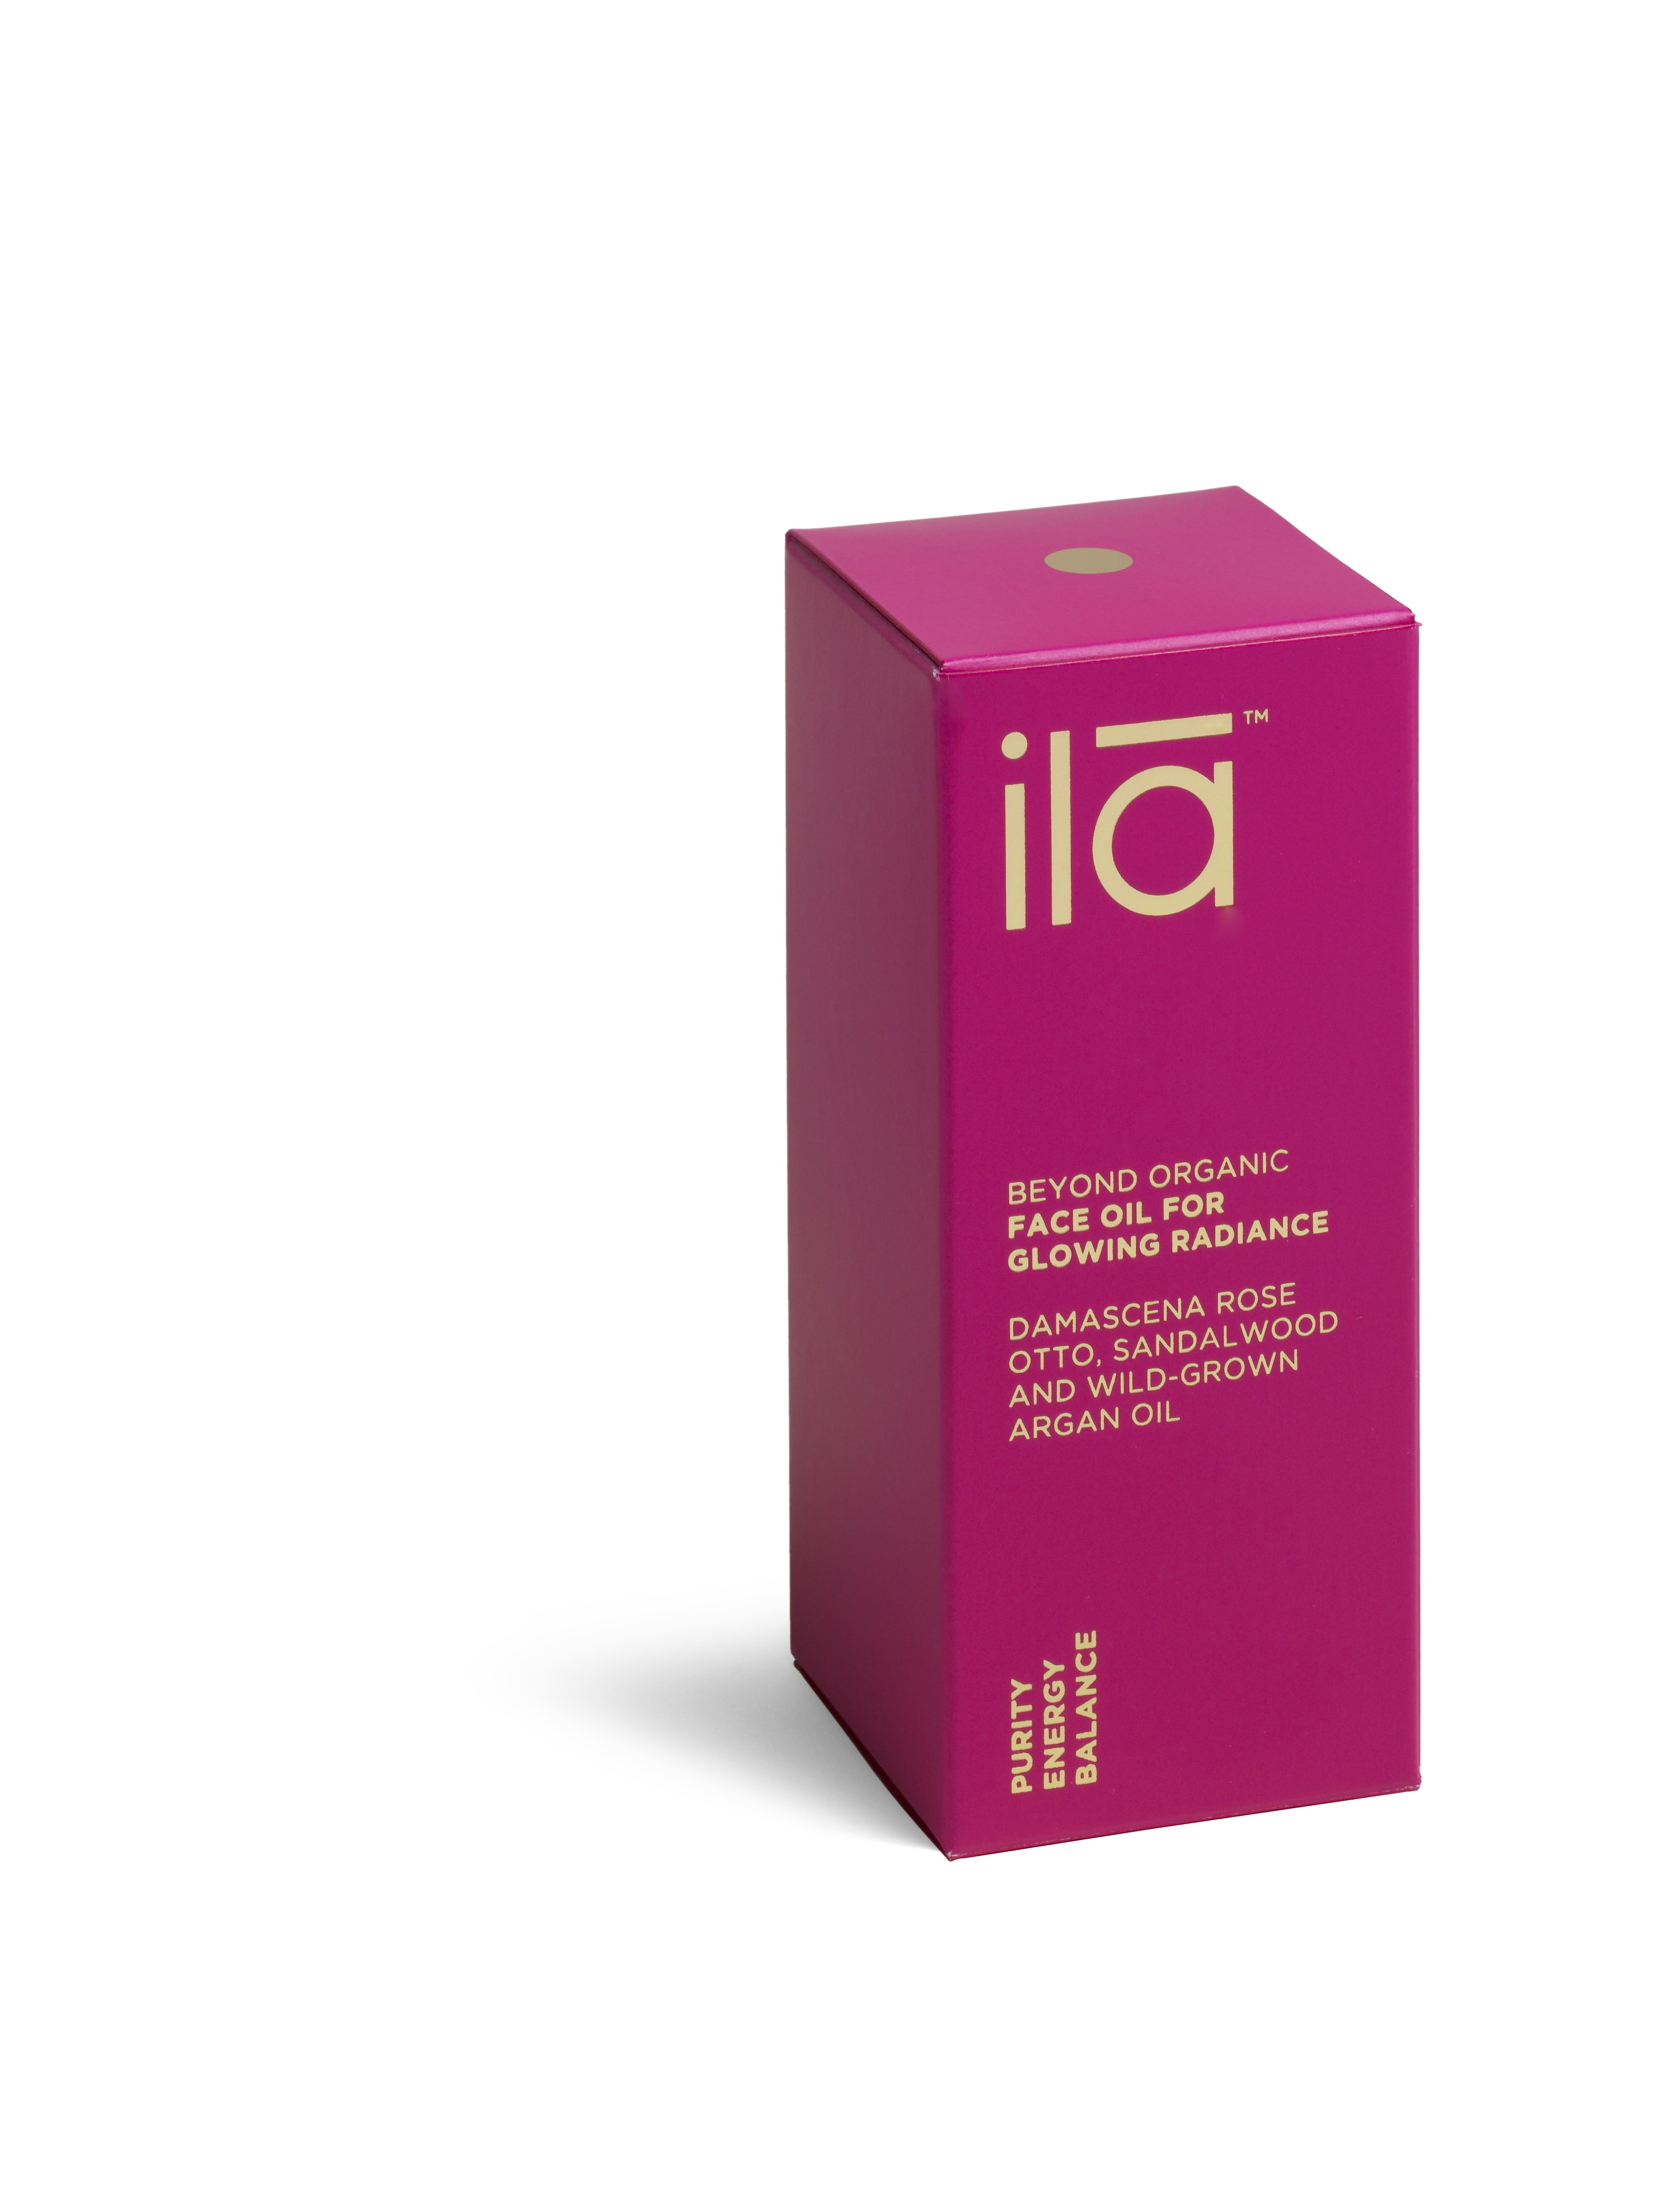 Ila Face Oil for Glowing Radiance at the Love Organics Company